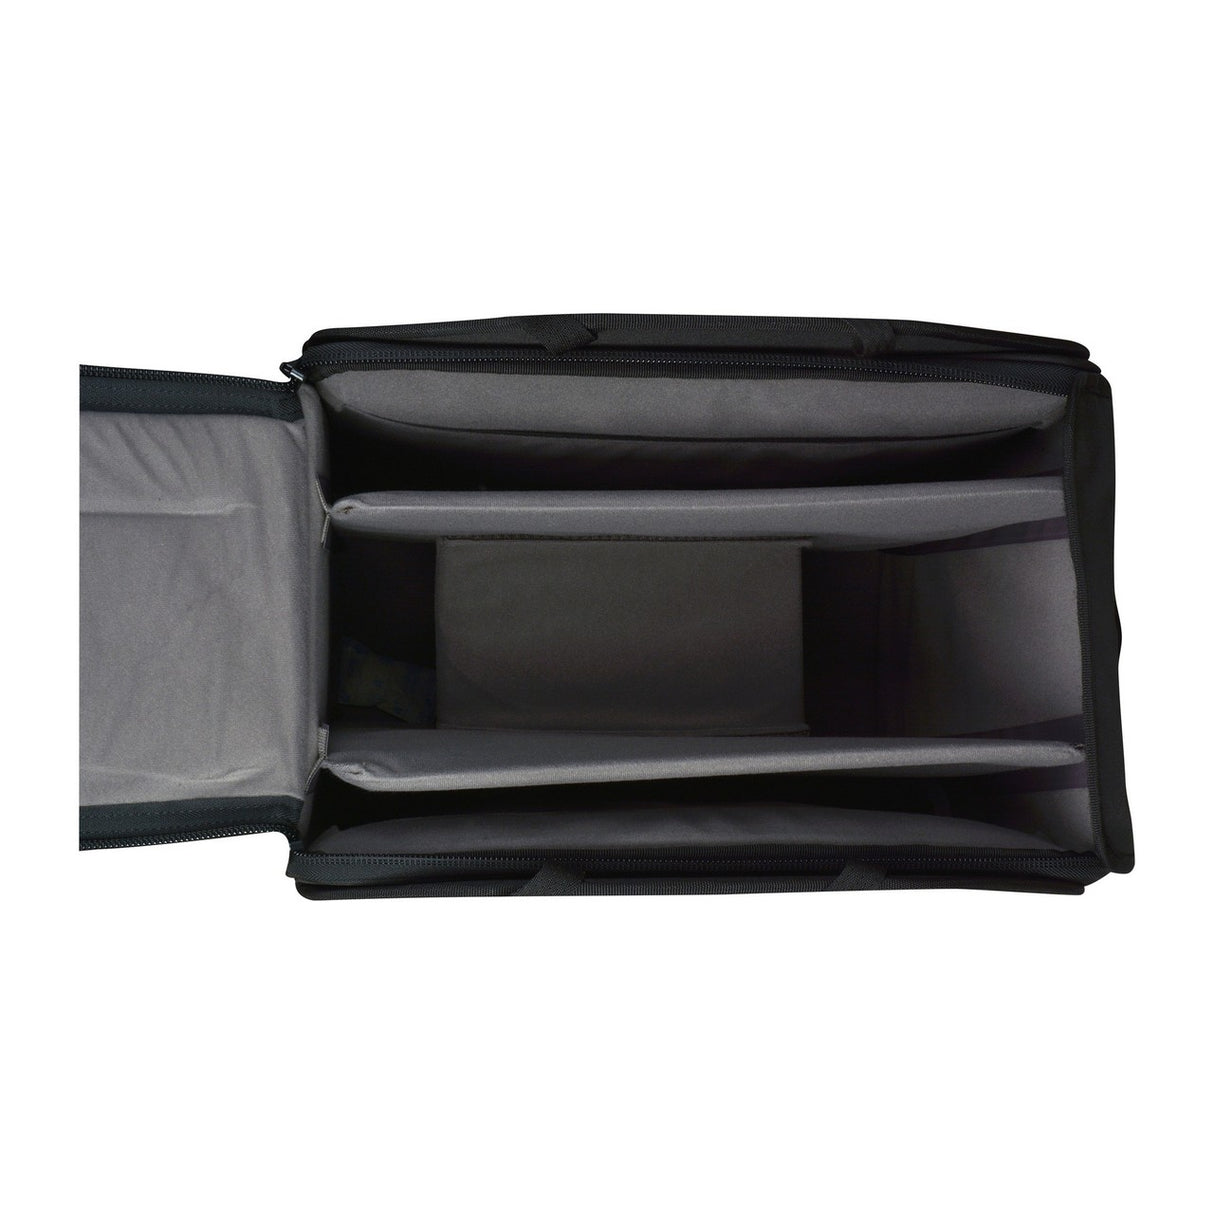 Litepanels 900-3522 | Light Carry Case For 2 Astra 1 x 1s